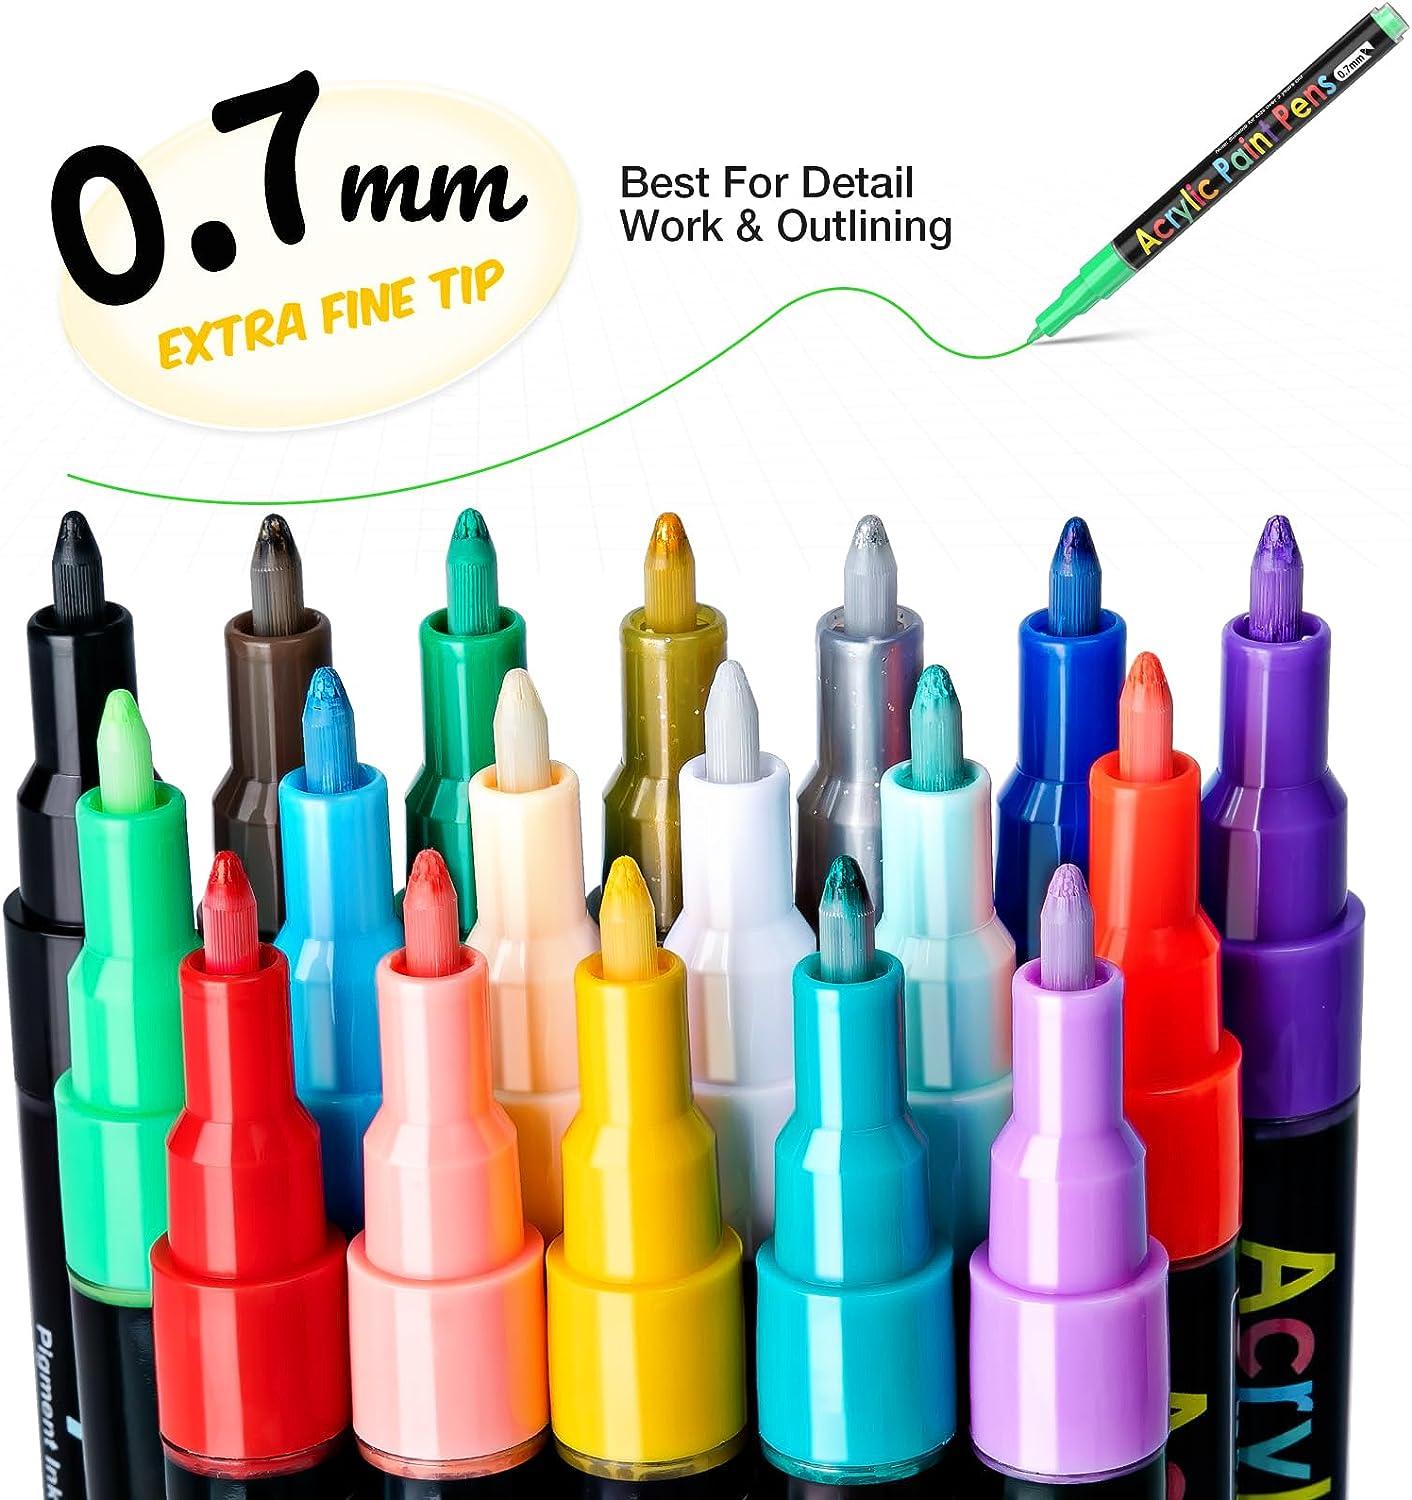 Acrylic Paint Pens, Set of 60 Colors Paint Markers Pens for Rocks, 0.77MM  Fine Tip, Craft, Ceramic, Glass, Wood, Fabric, Canvas Art Crafting Supplies